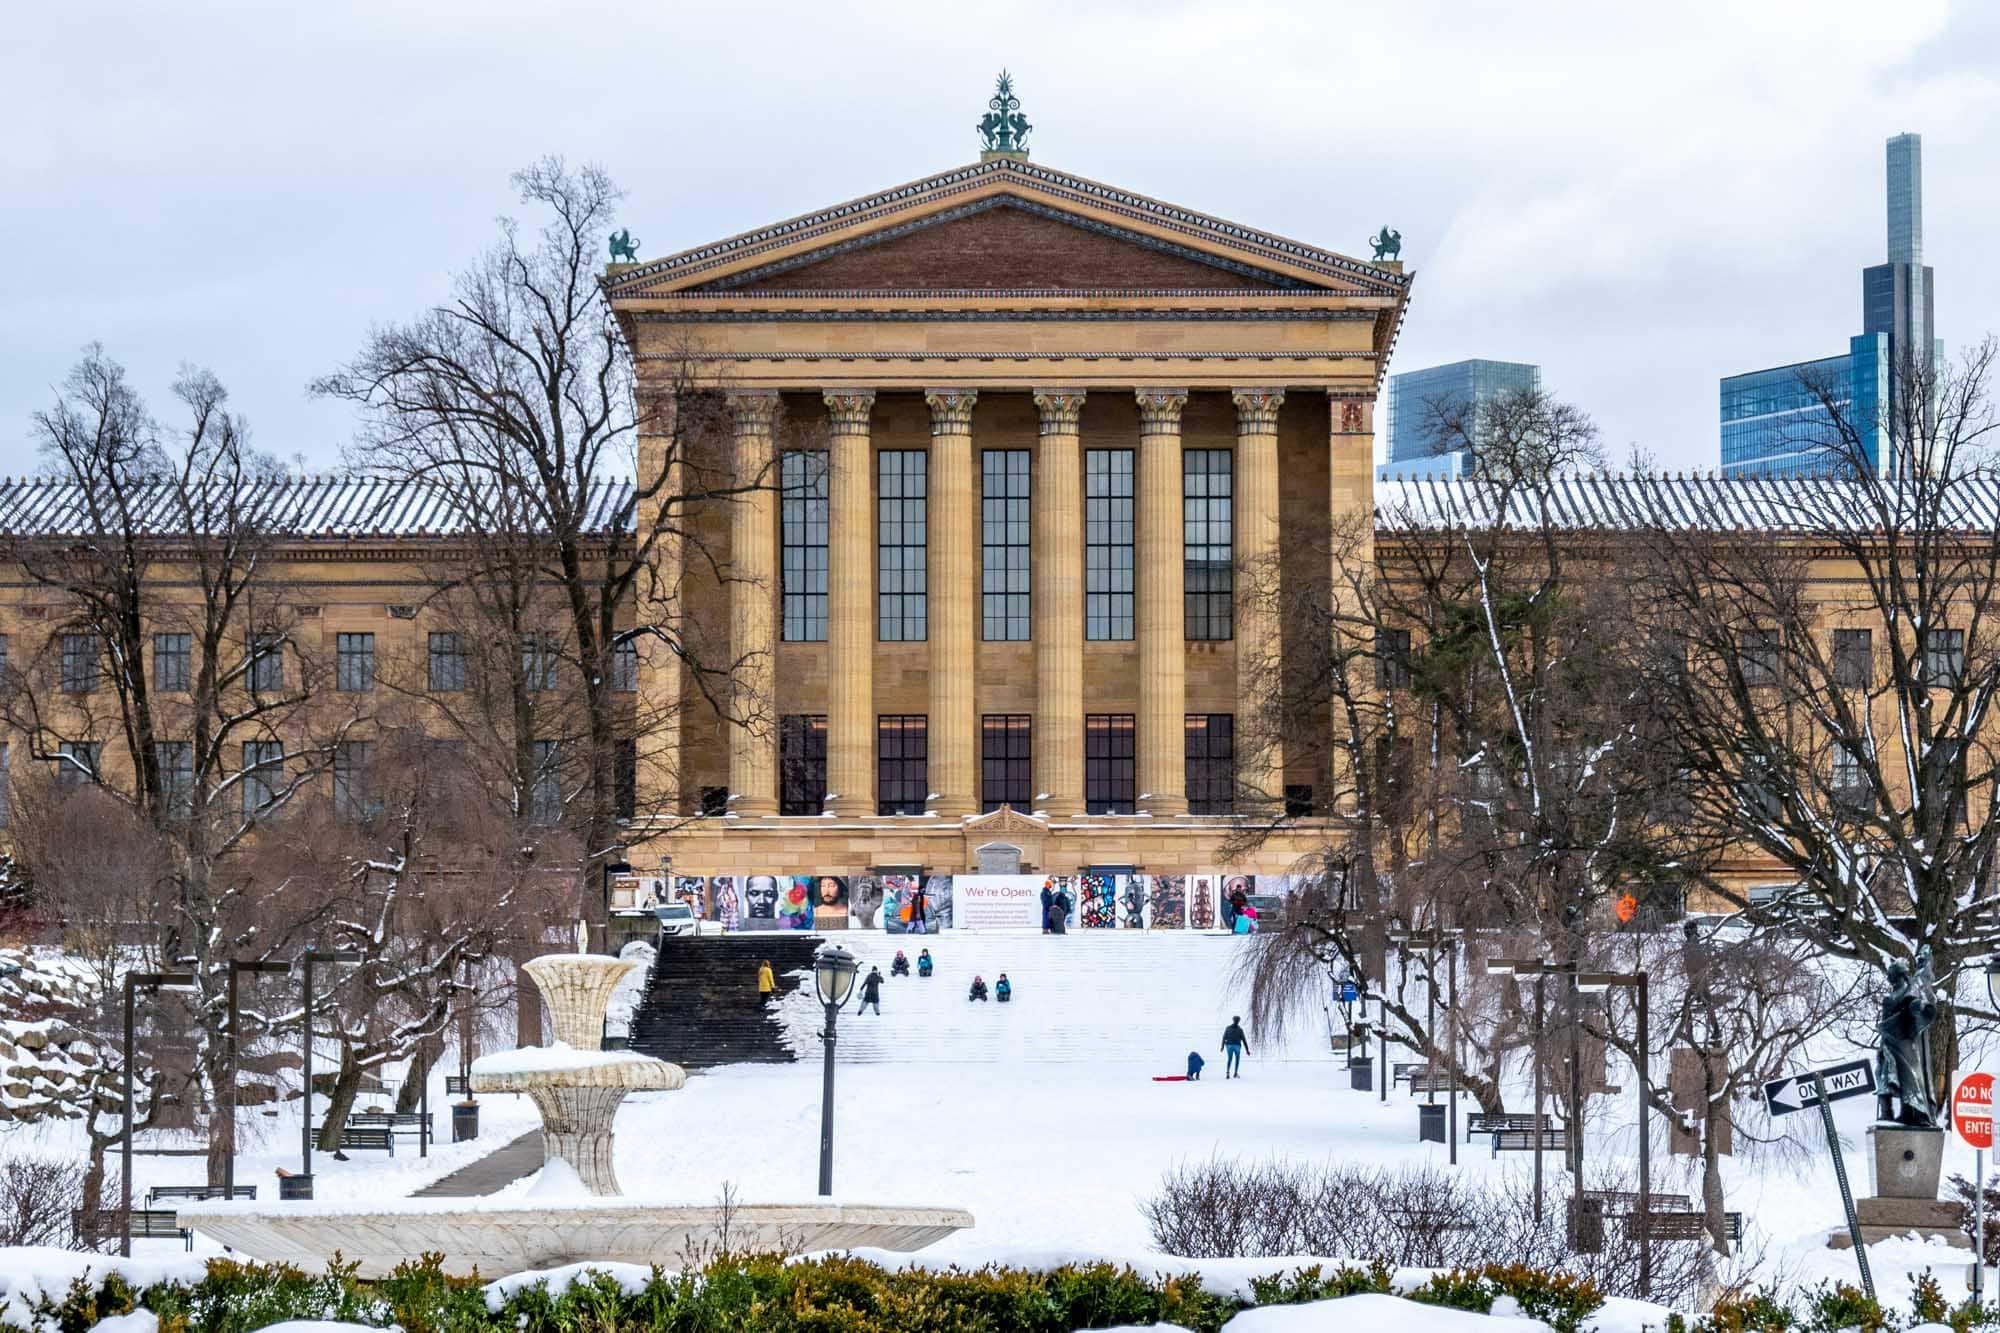 People sledding on the snow-covered steps of a large building